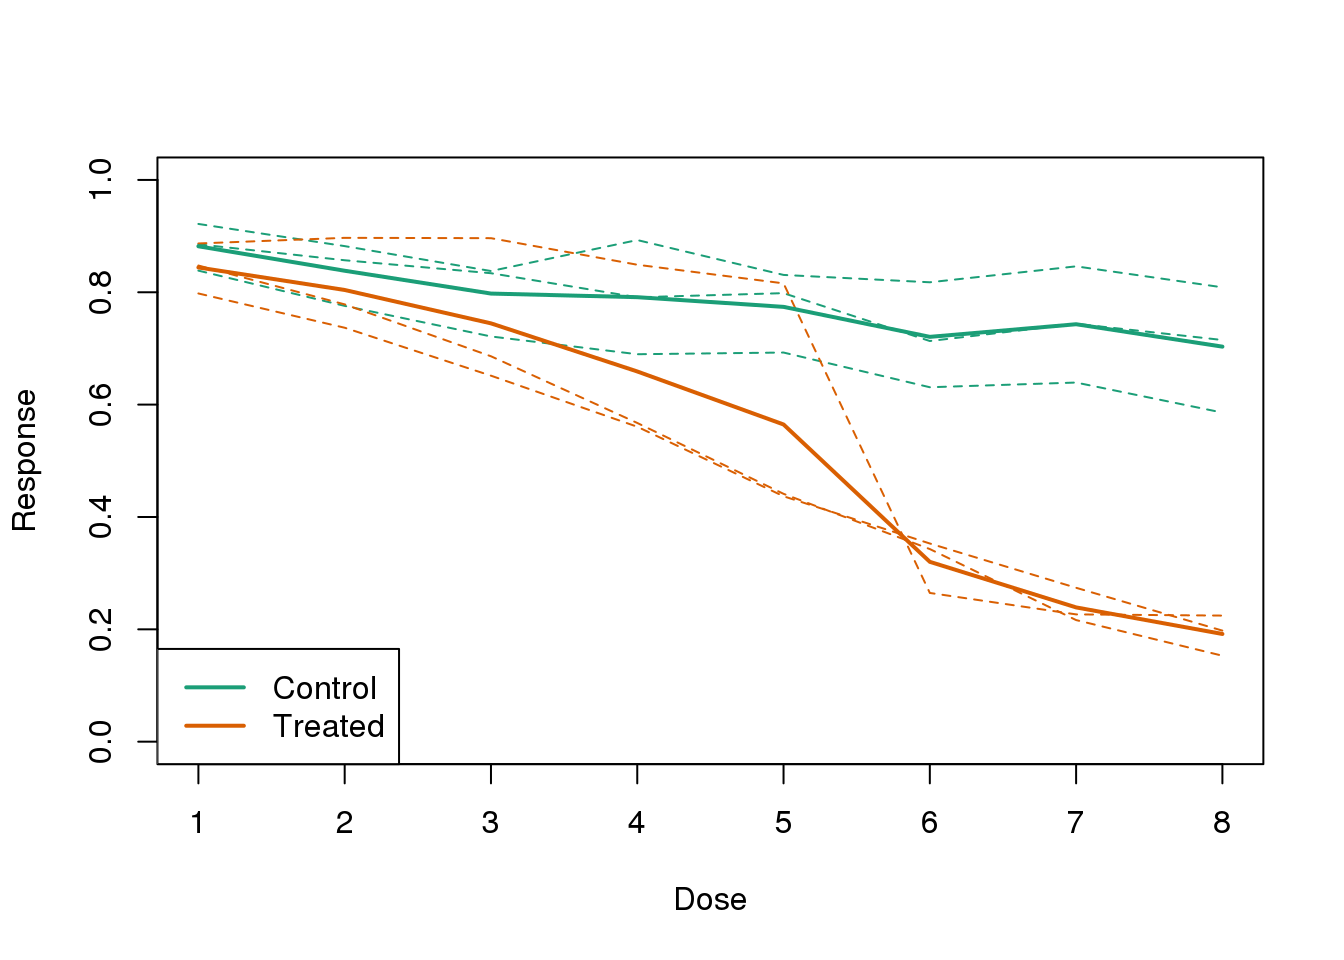 Because dose is an important factor, we show it in this plot.